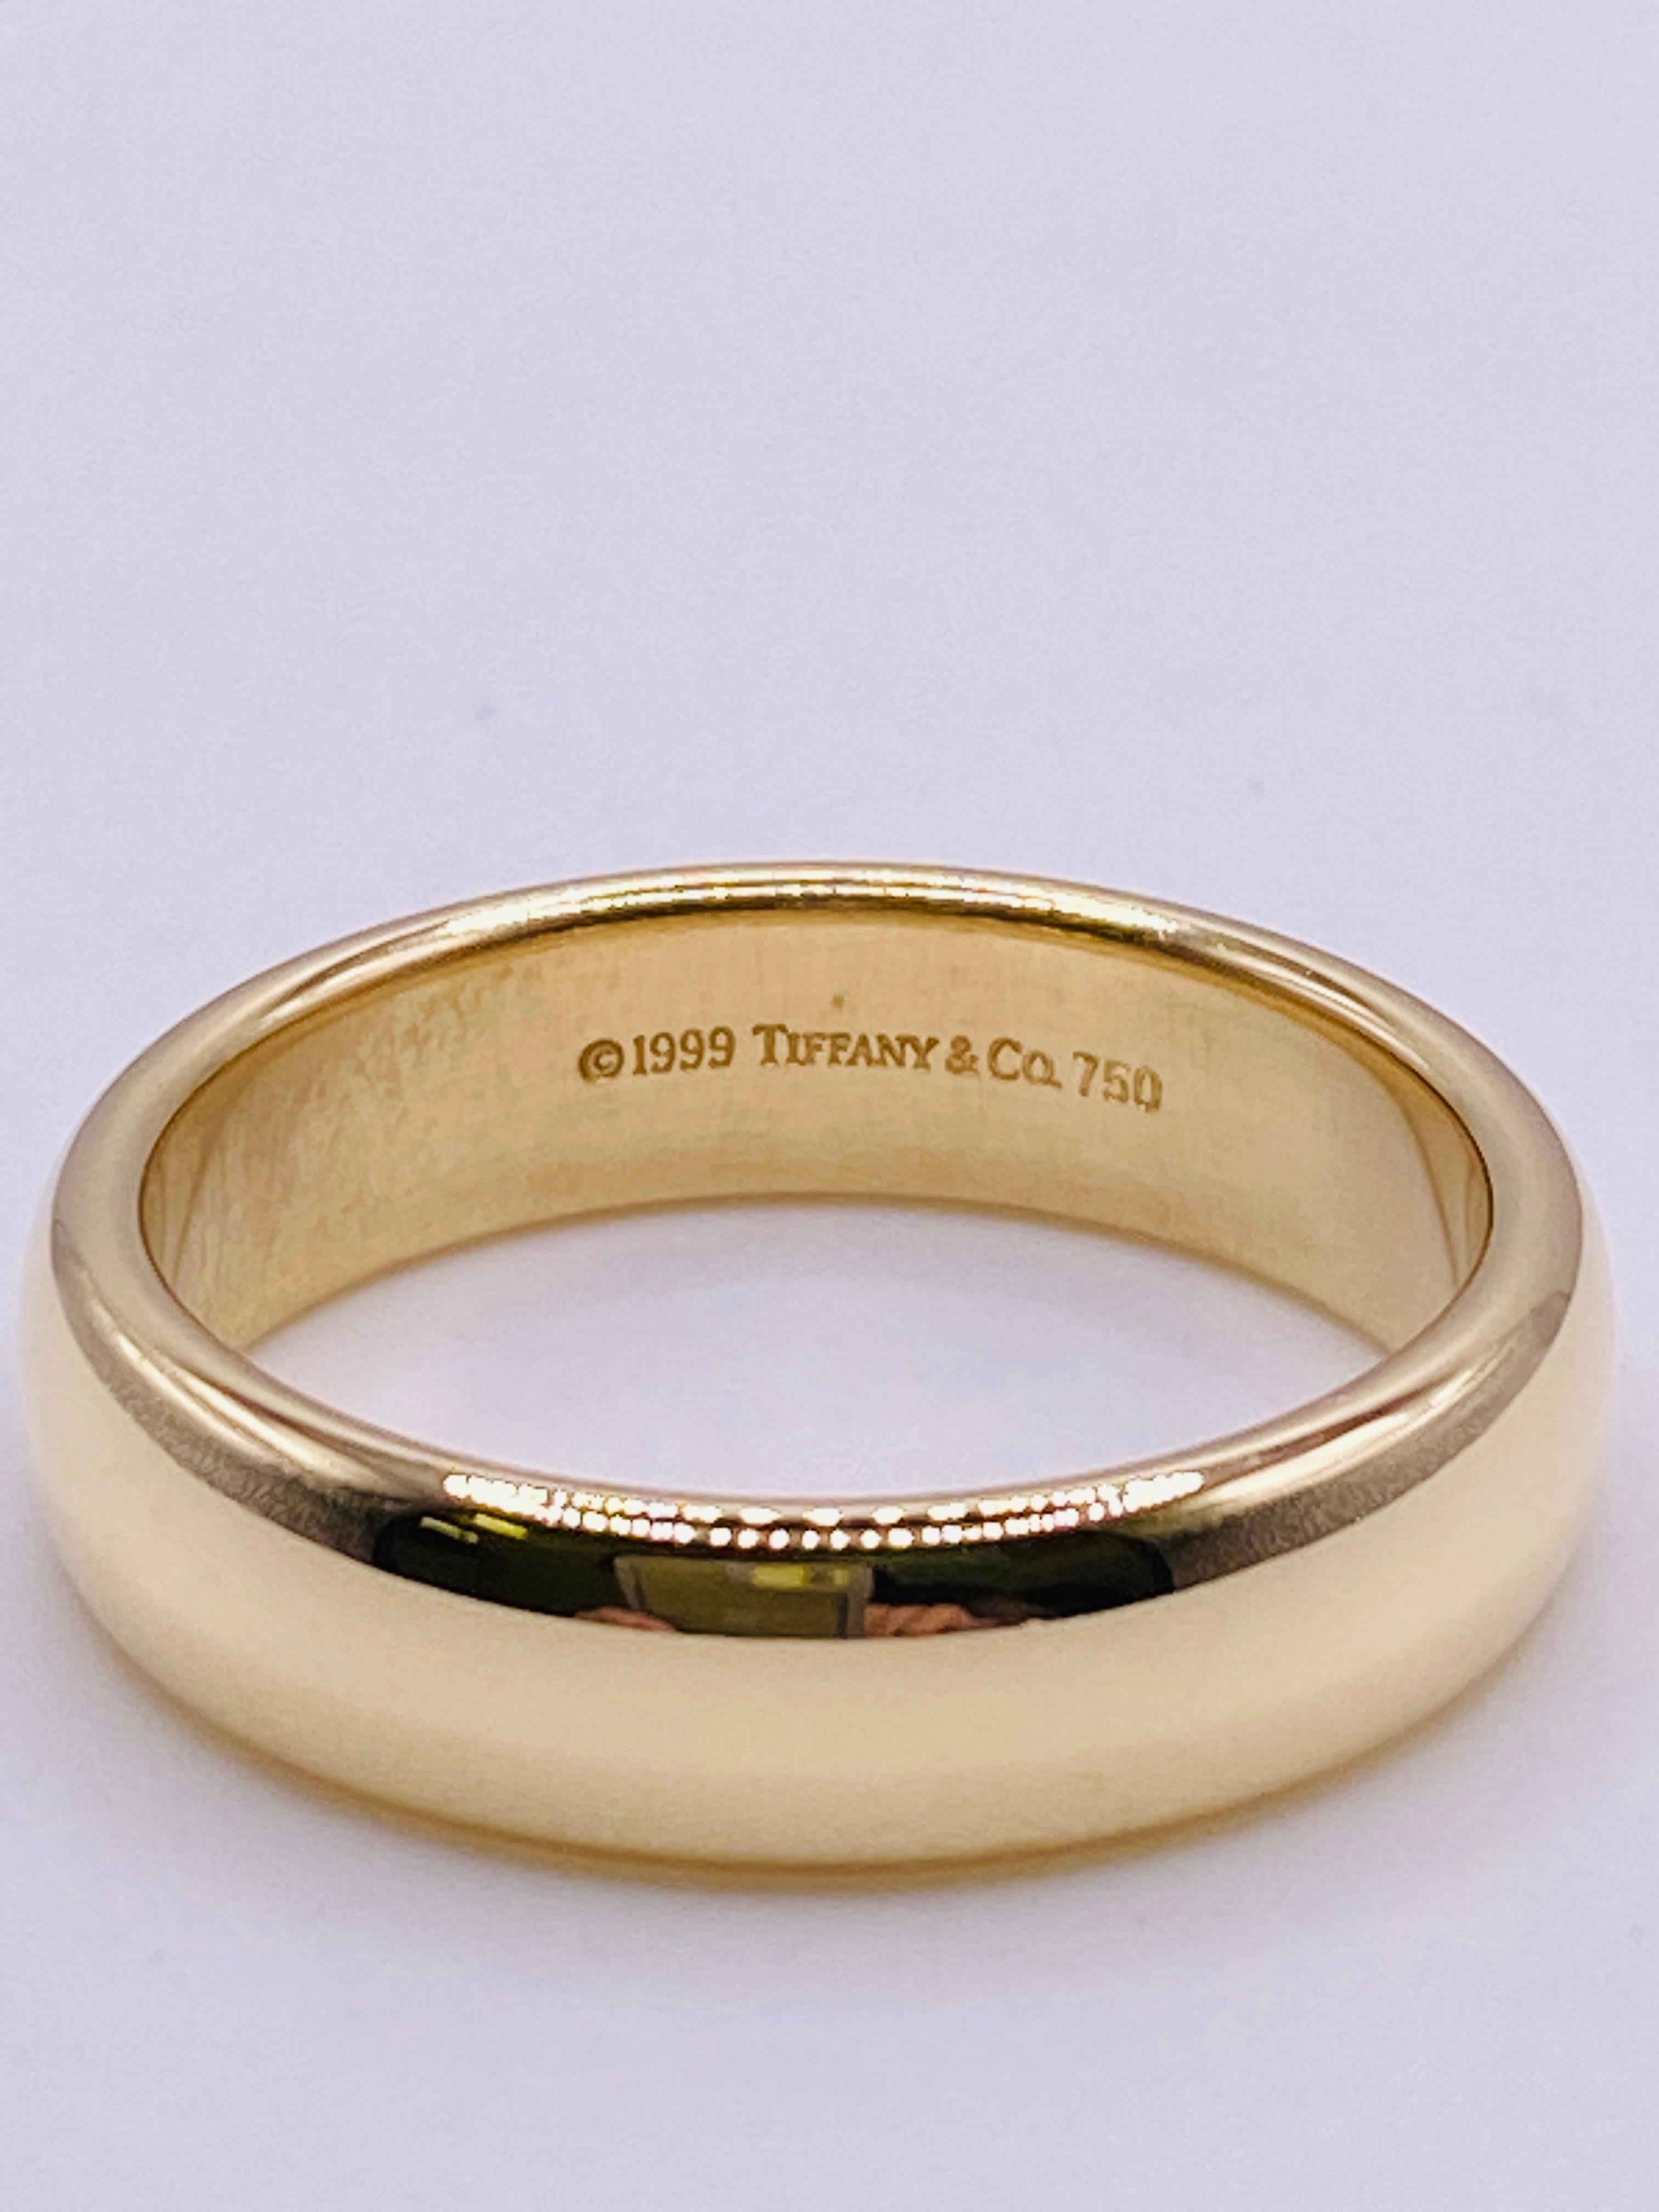 Tiffany & Co Gold Wedding Band In Good Condition For Sale In DALLAS, TX